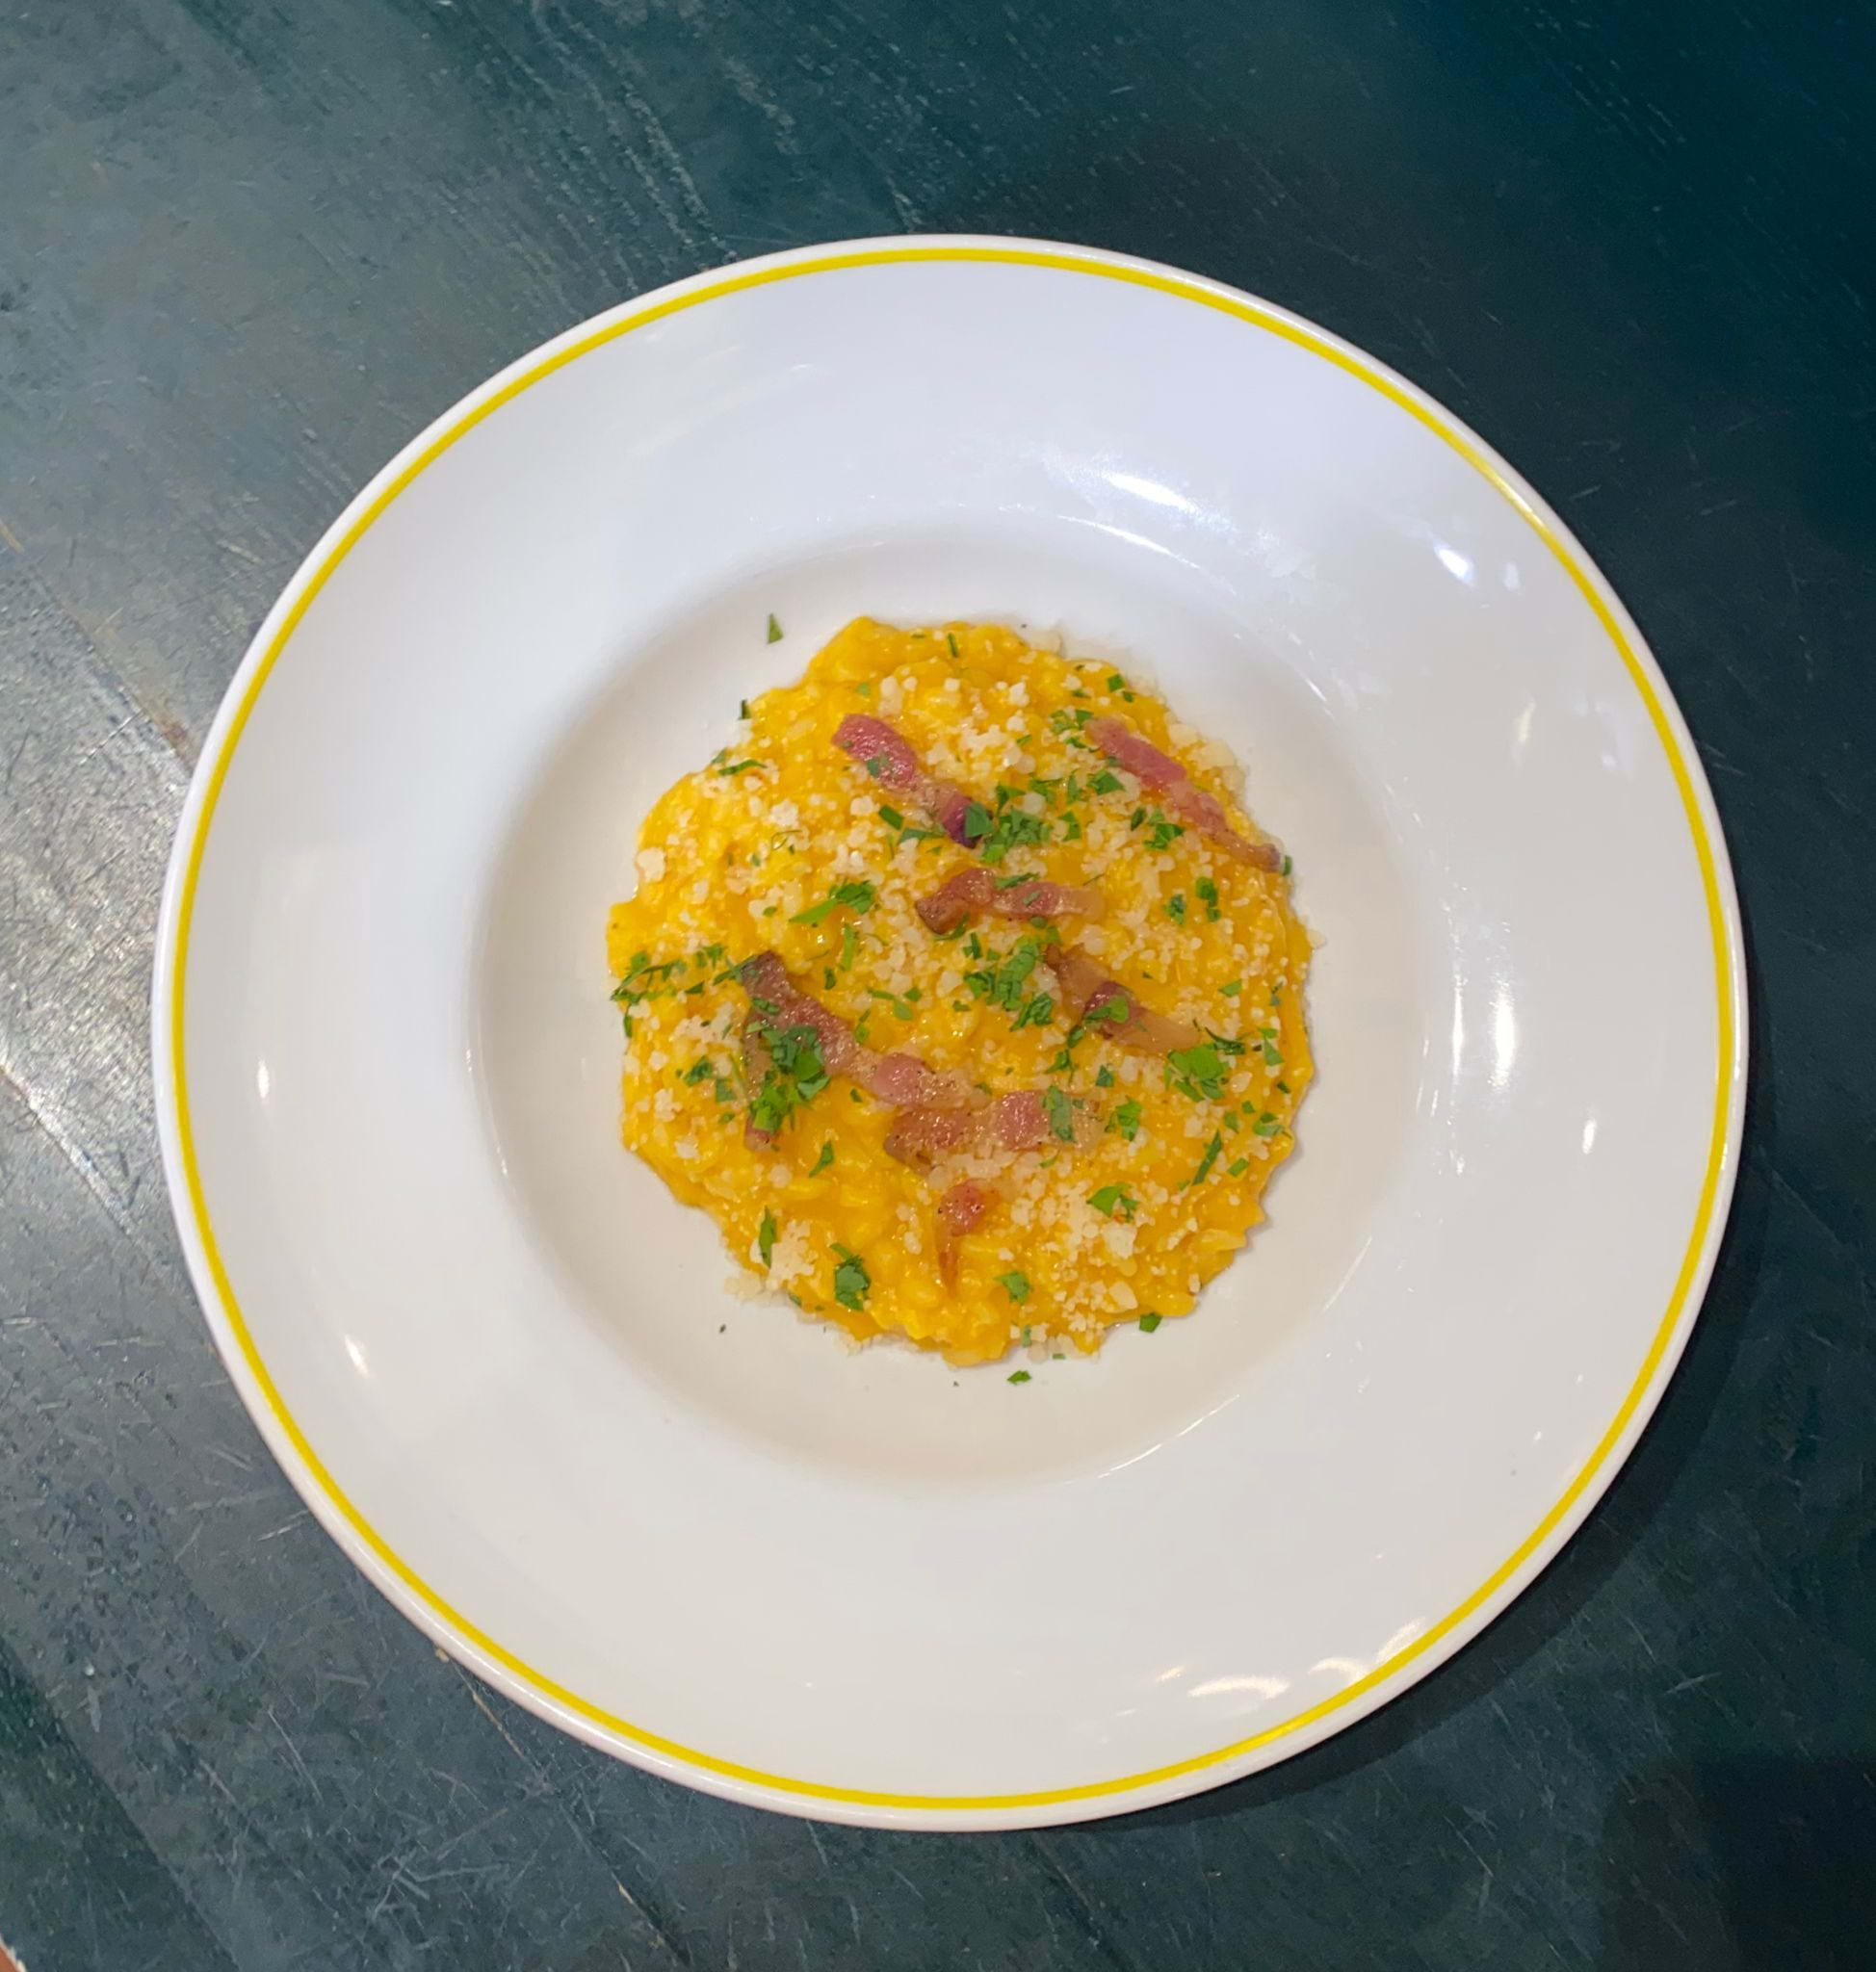 Risotto zucca&pancetta – Photo from Positano by Biagio D. (24/02/2023)